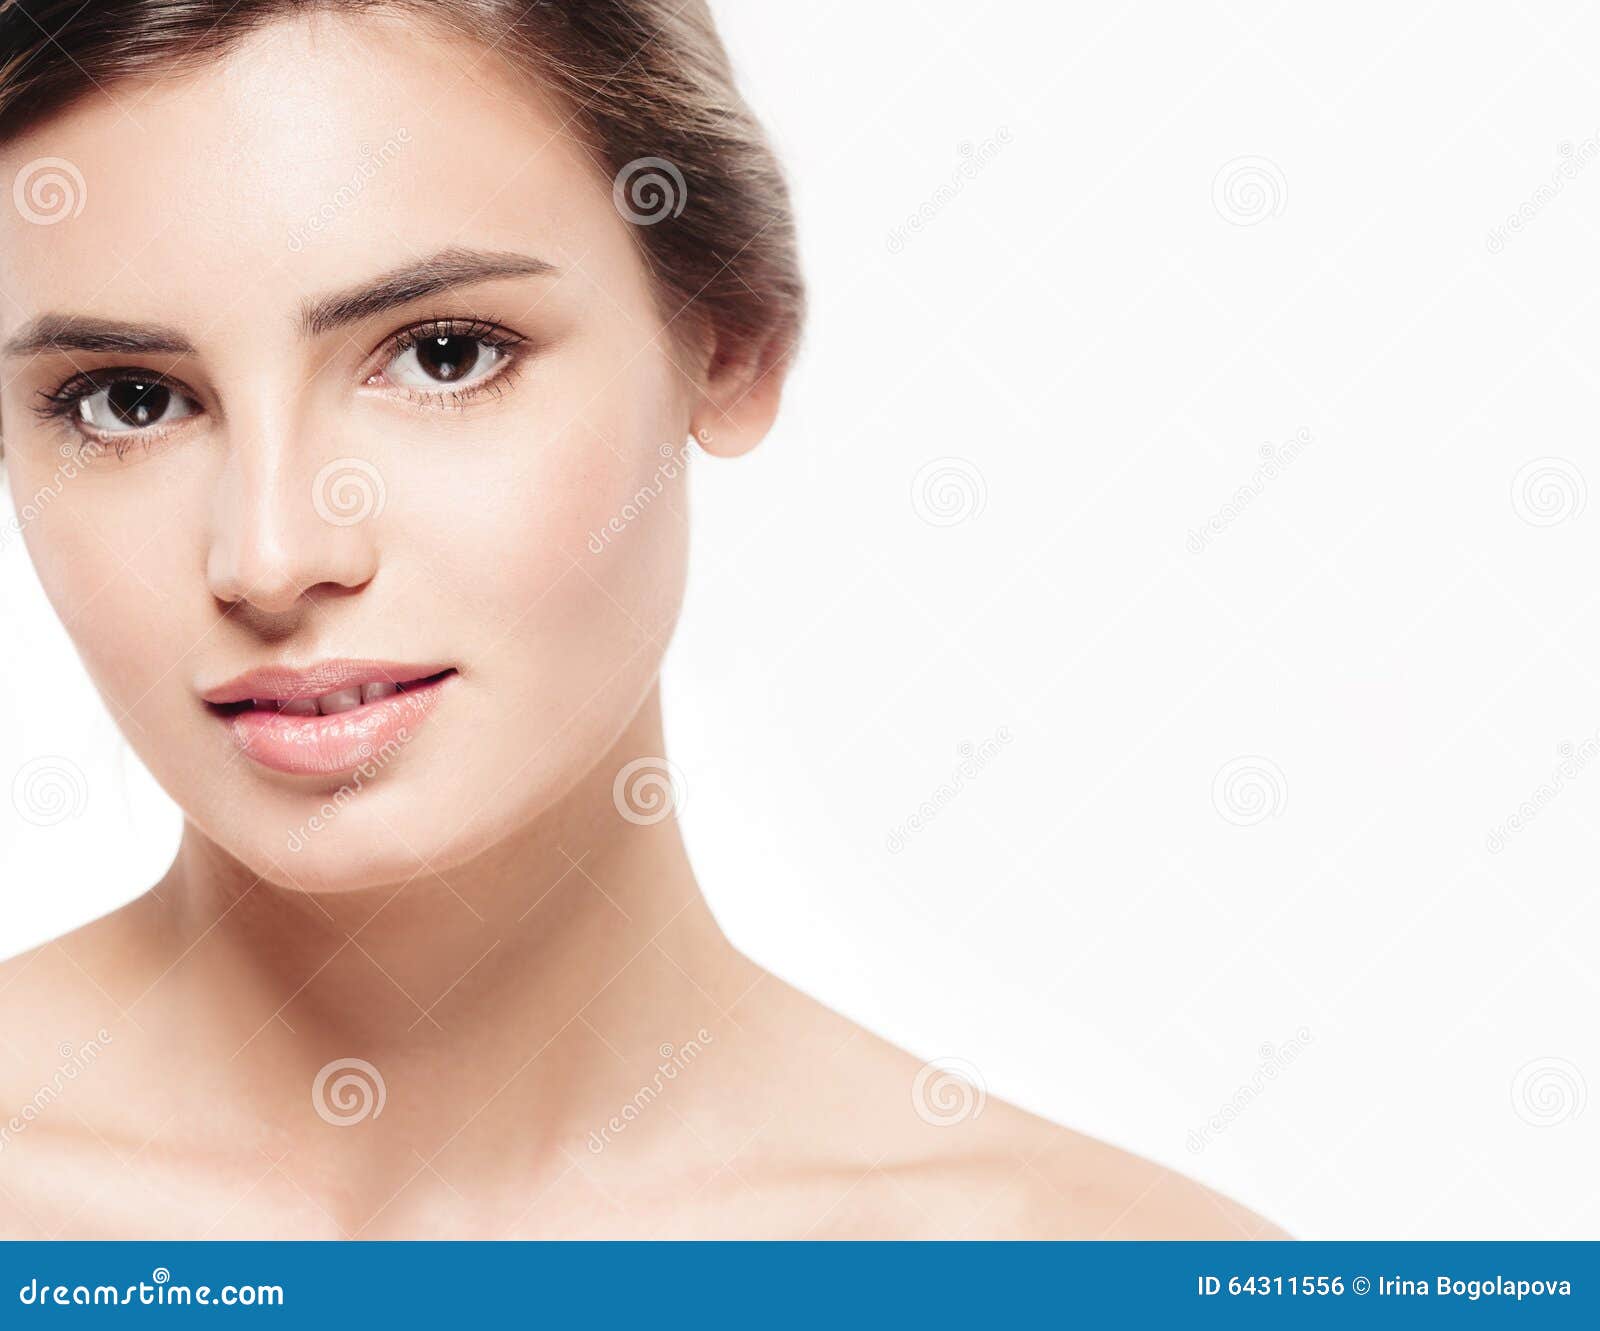 Young beautiful woman face close-up beauty portrait with healthy <b>nature skin</b> <b>...</b> - young-beautiful-woman-face-close-up-beauty-portrait-healthy-nature-skin-perfect-make-up-studio-64311556